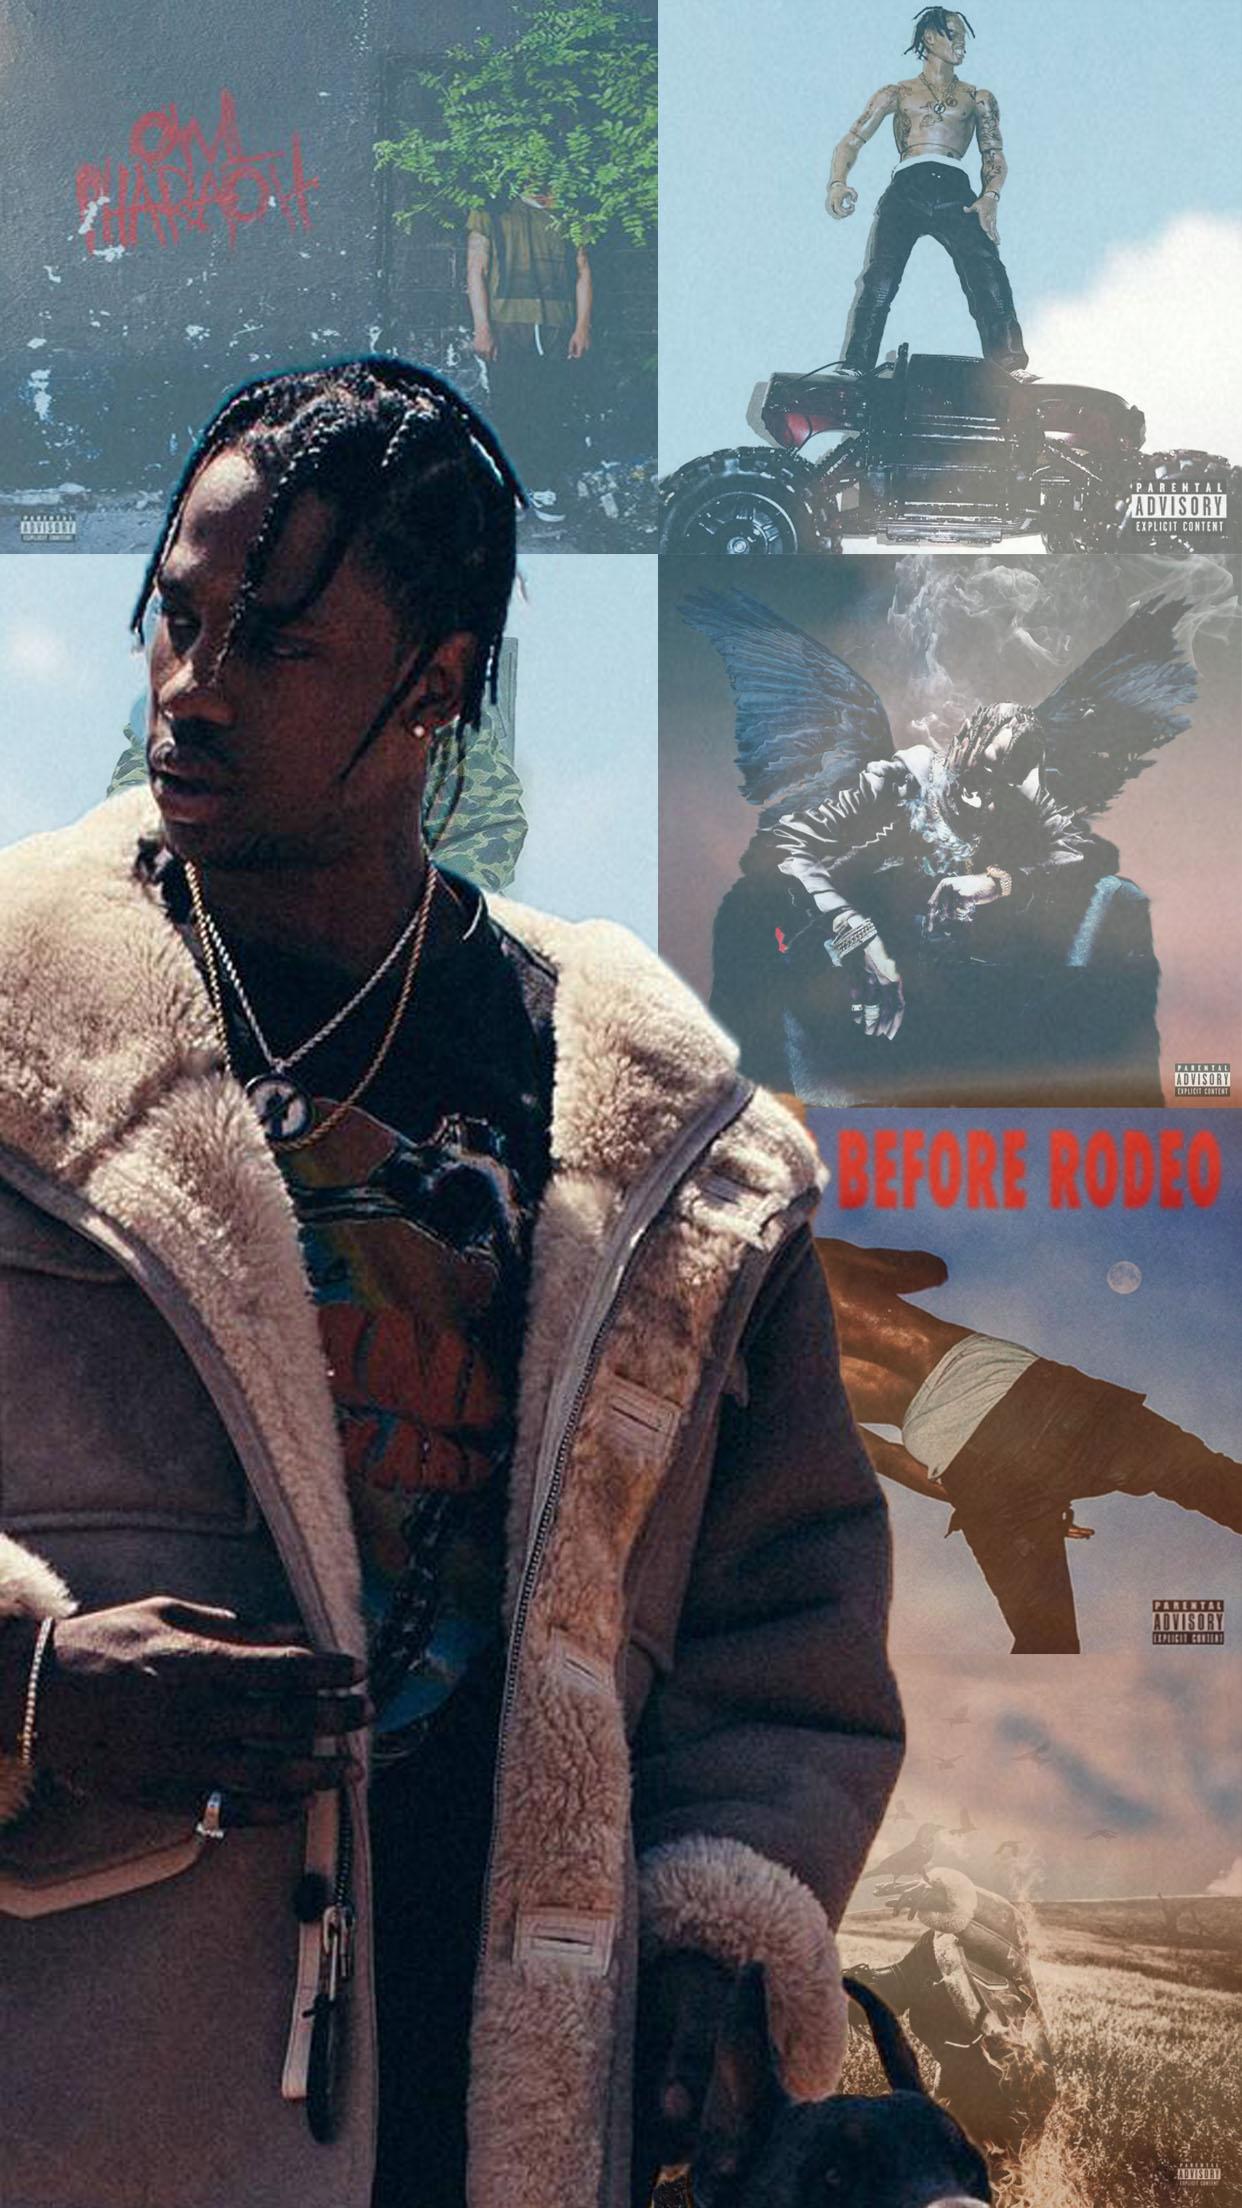 Here's a collage of Travis Scott's albums I createdwallpaper